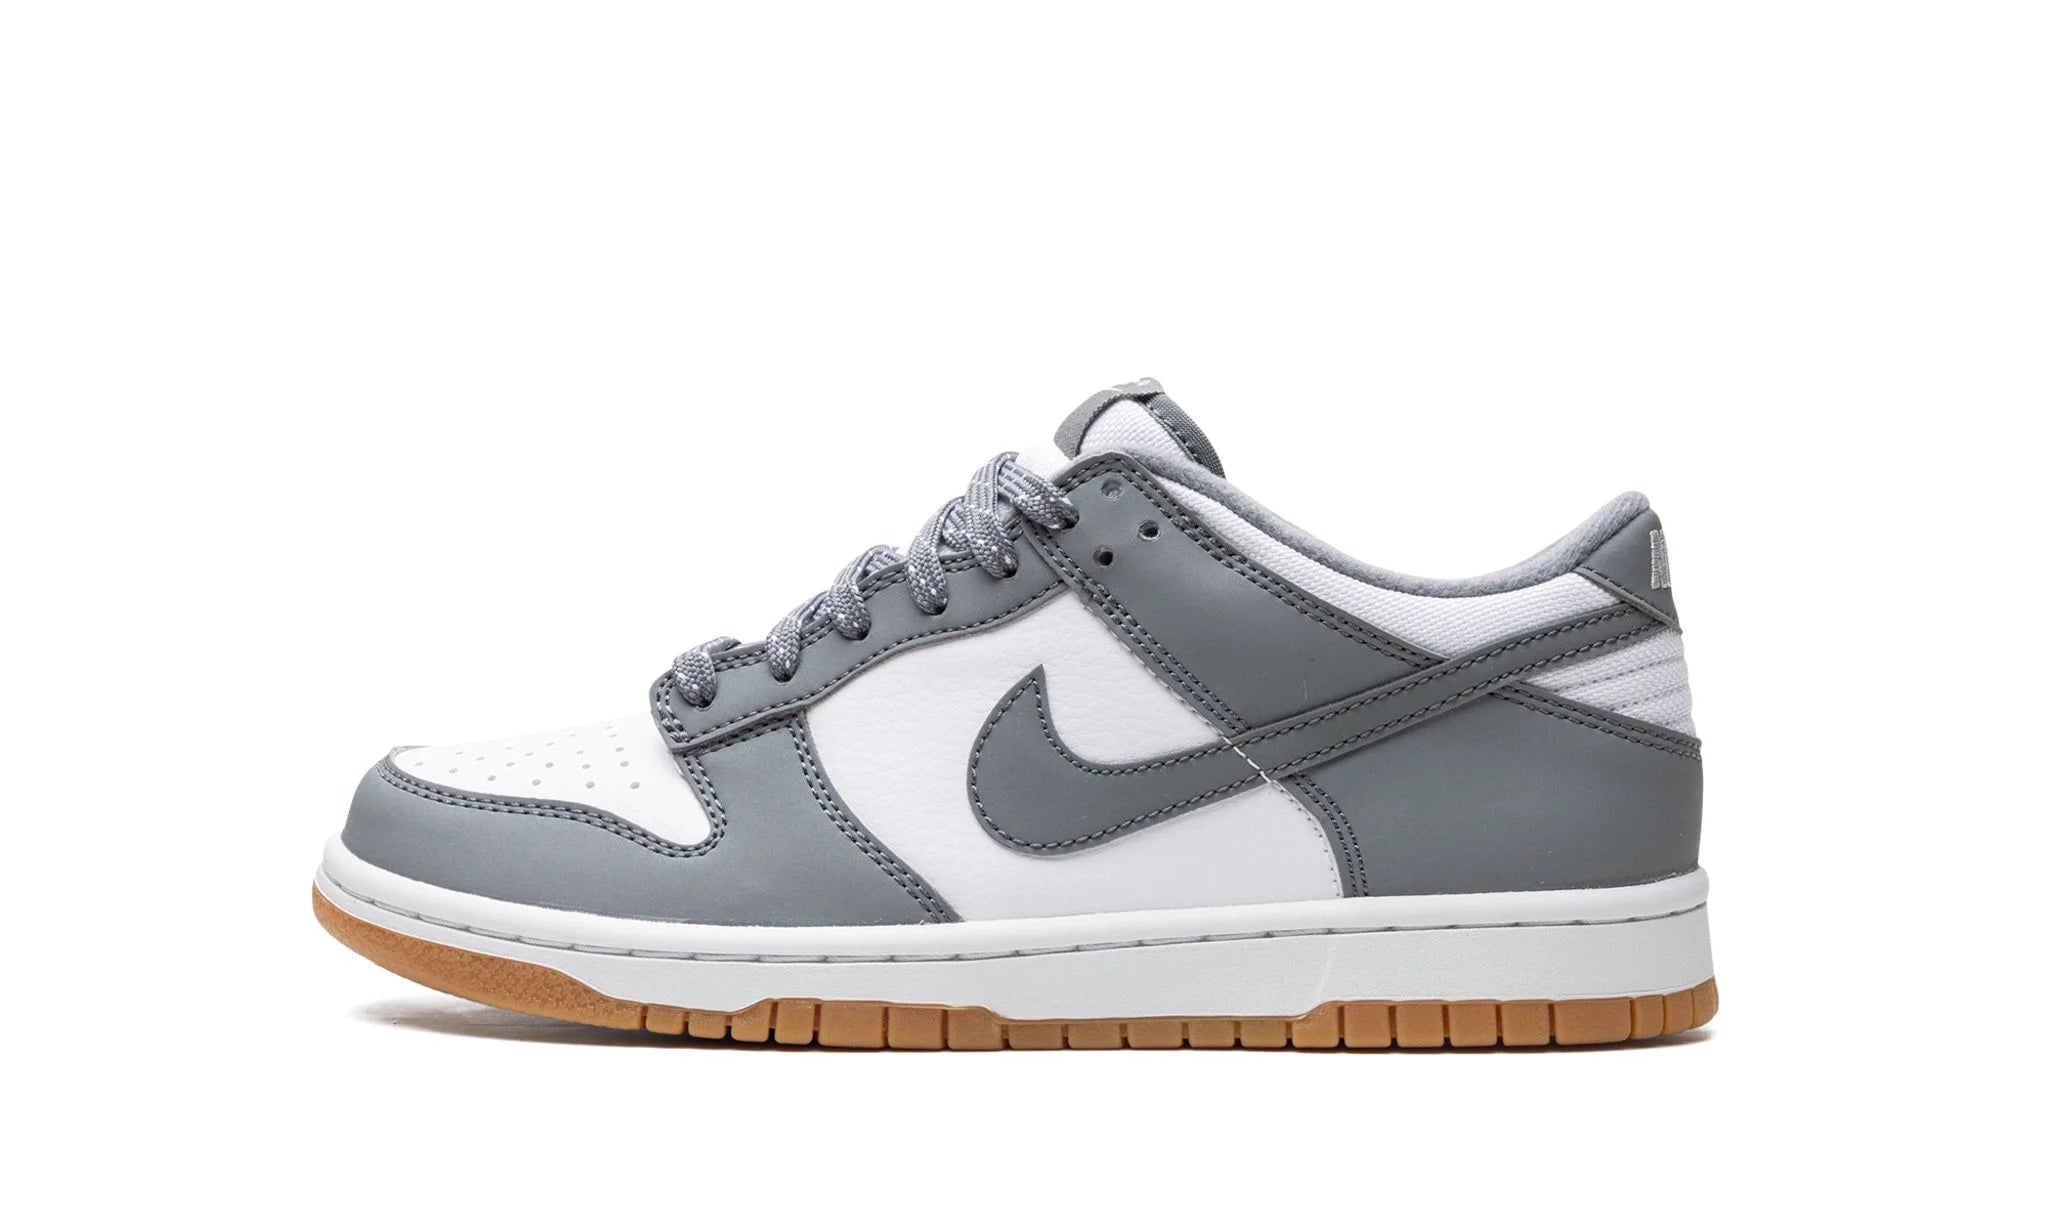 Nike Dunk Low GS "Reflective Grey"